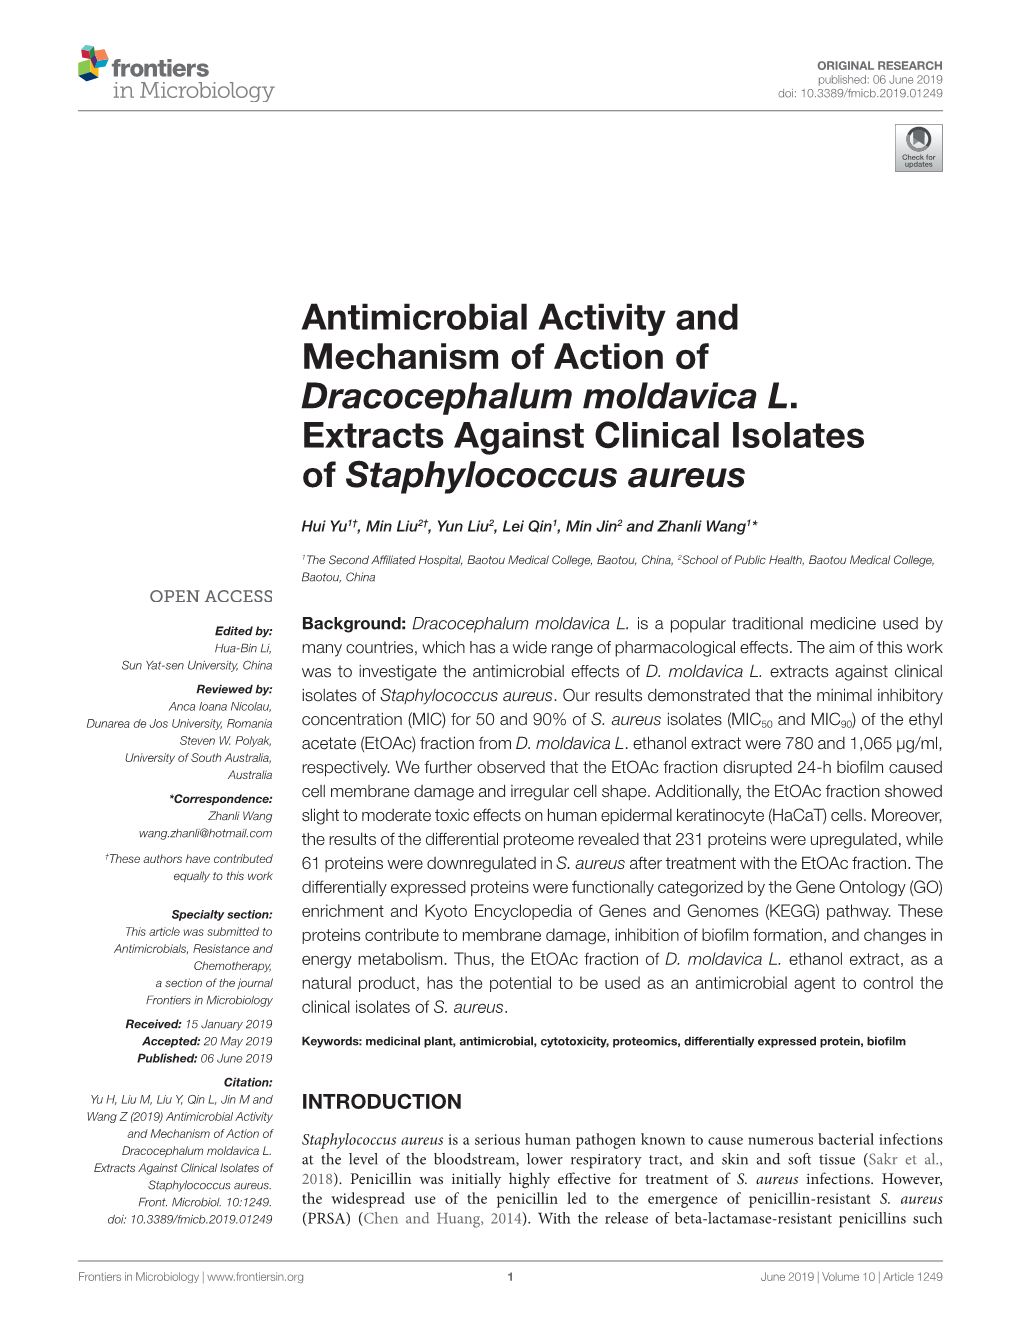 Antimicrobial Activity and Mechanism of Action of ﻿Dracocephalum